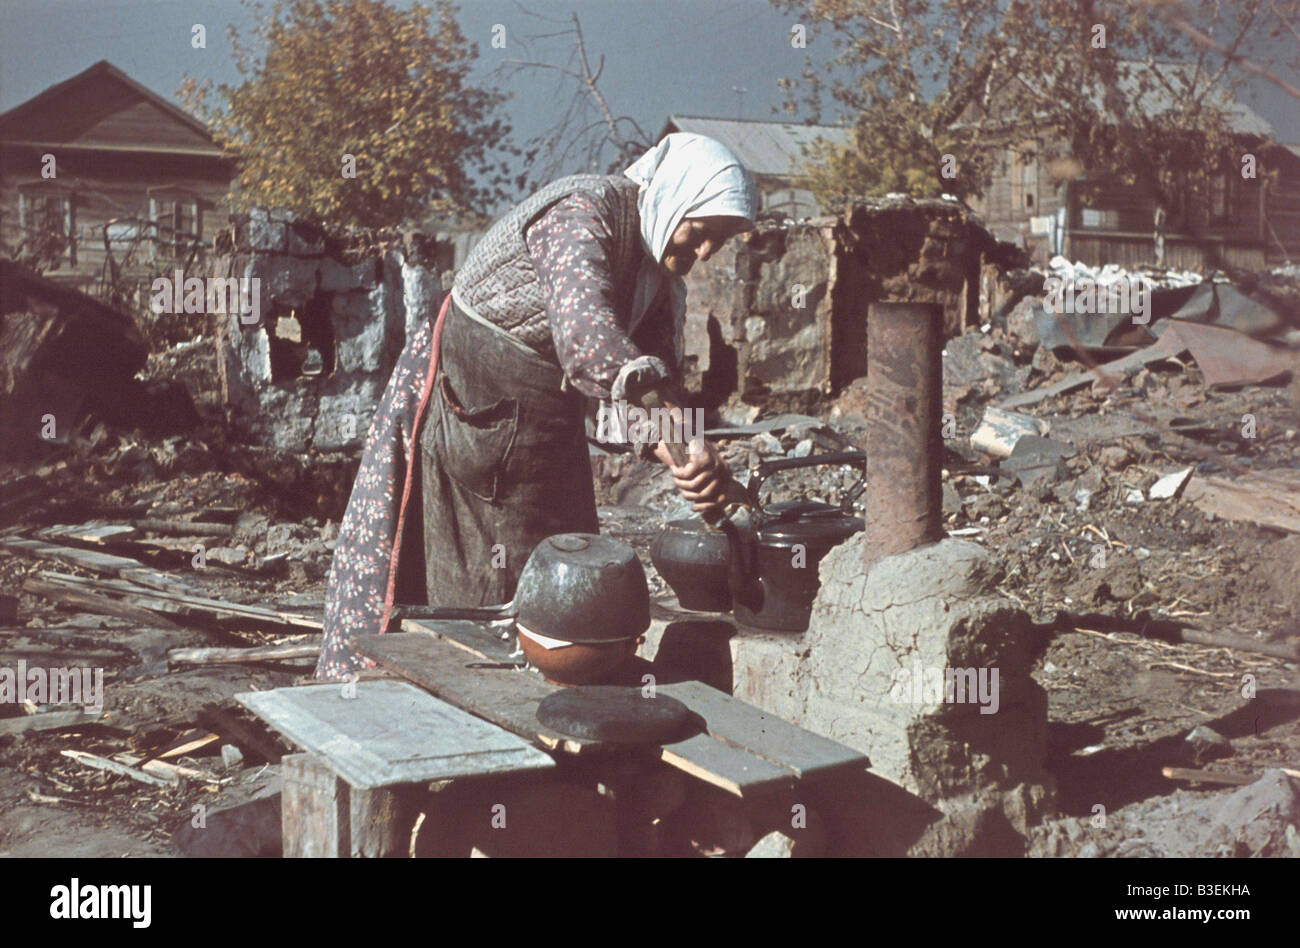 Residents in Stalingrad Ruins. Stock Photo